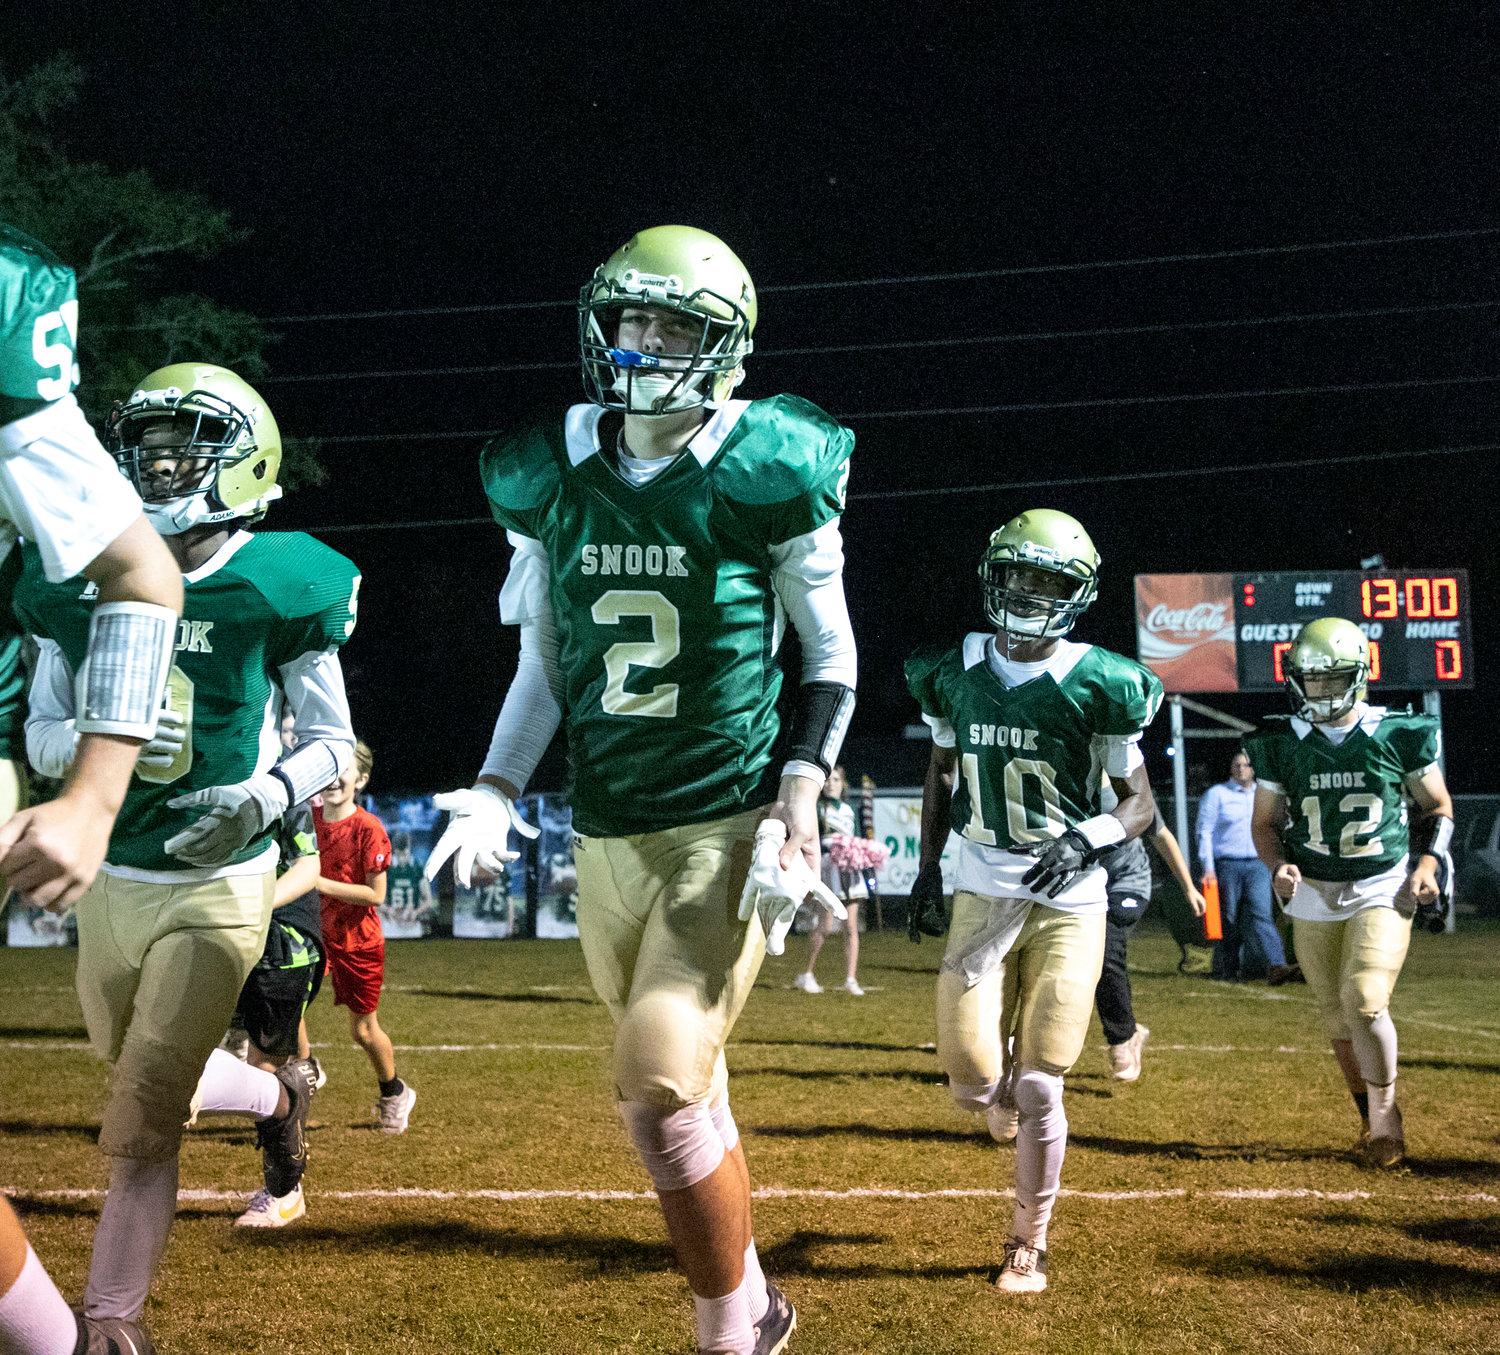 The Snook Christian Academy Eagles take the field ahead of their regular-season finale game against the Crenshaw Christian Cougars at the Summerdale School Oct. 28. Snook opens its second playoff appearance this Friday on the road.